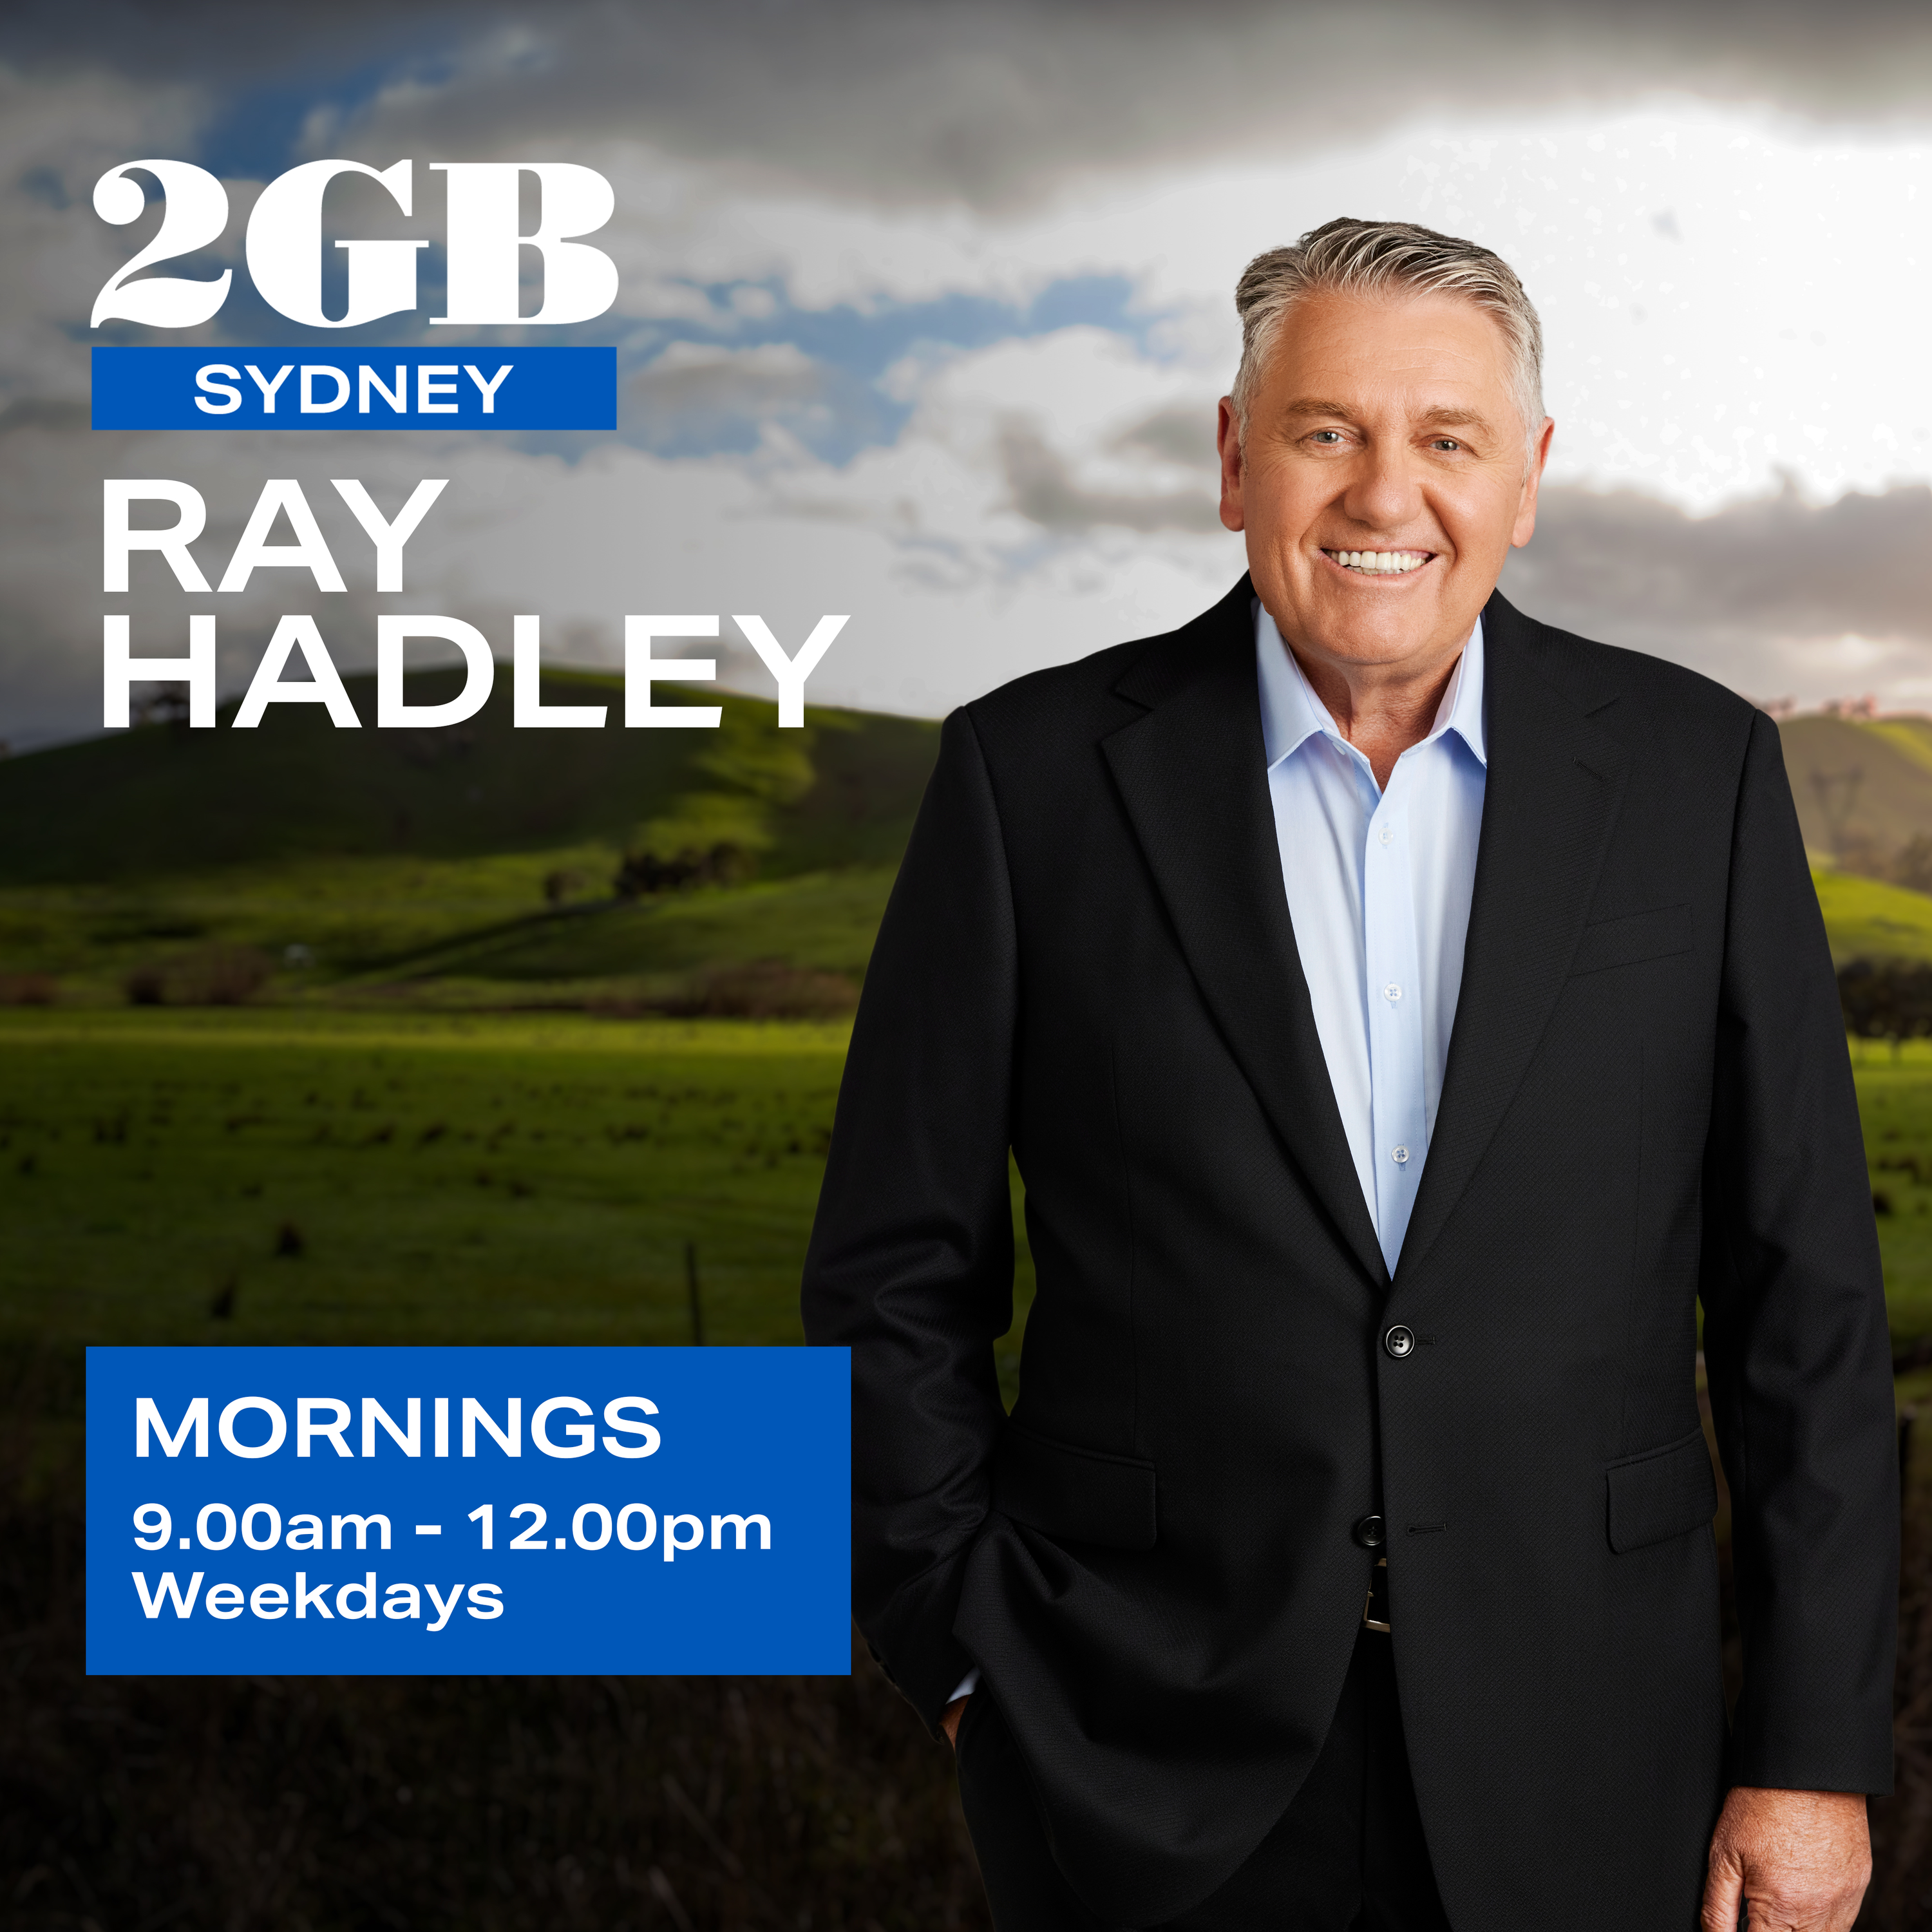 'I'm absolutely stunned': Ray Hadley surprised live on-air with great honour